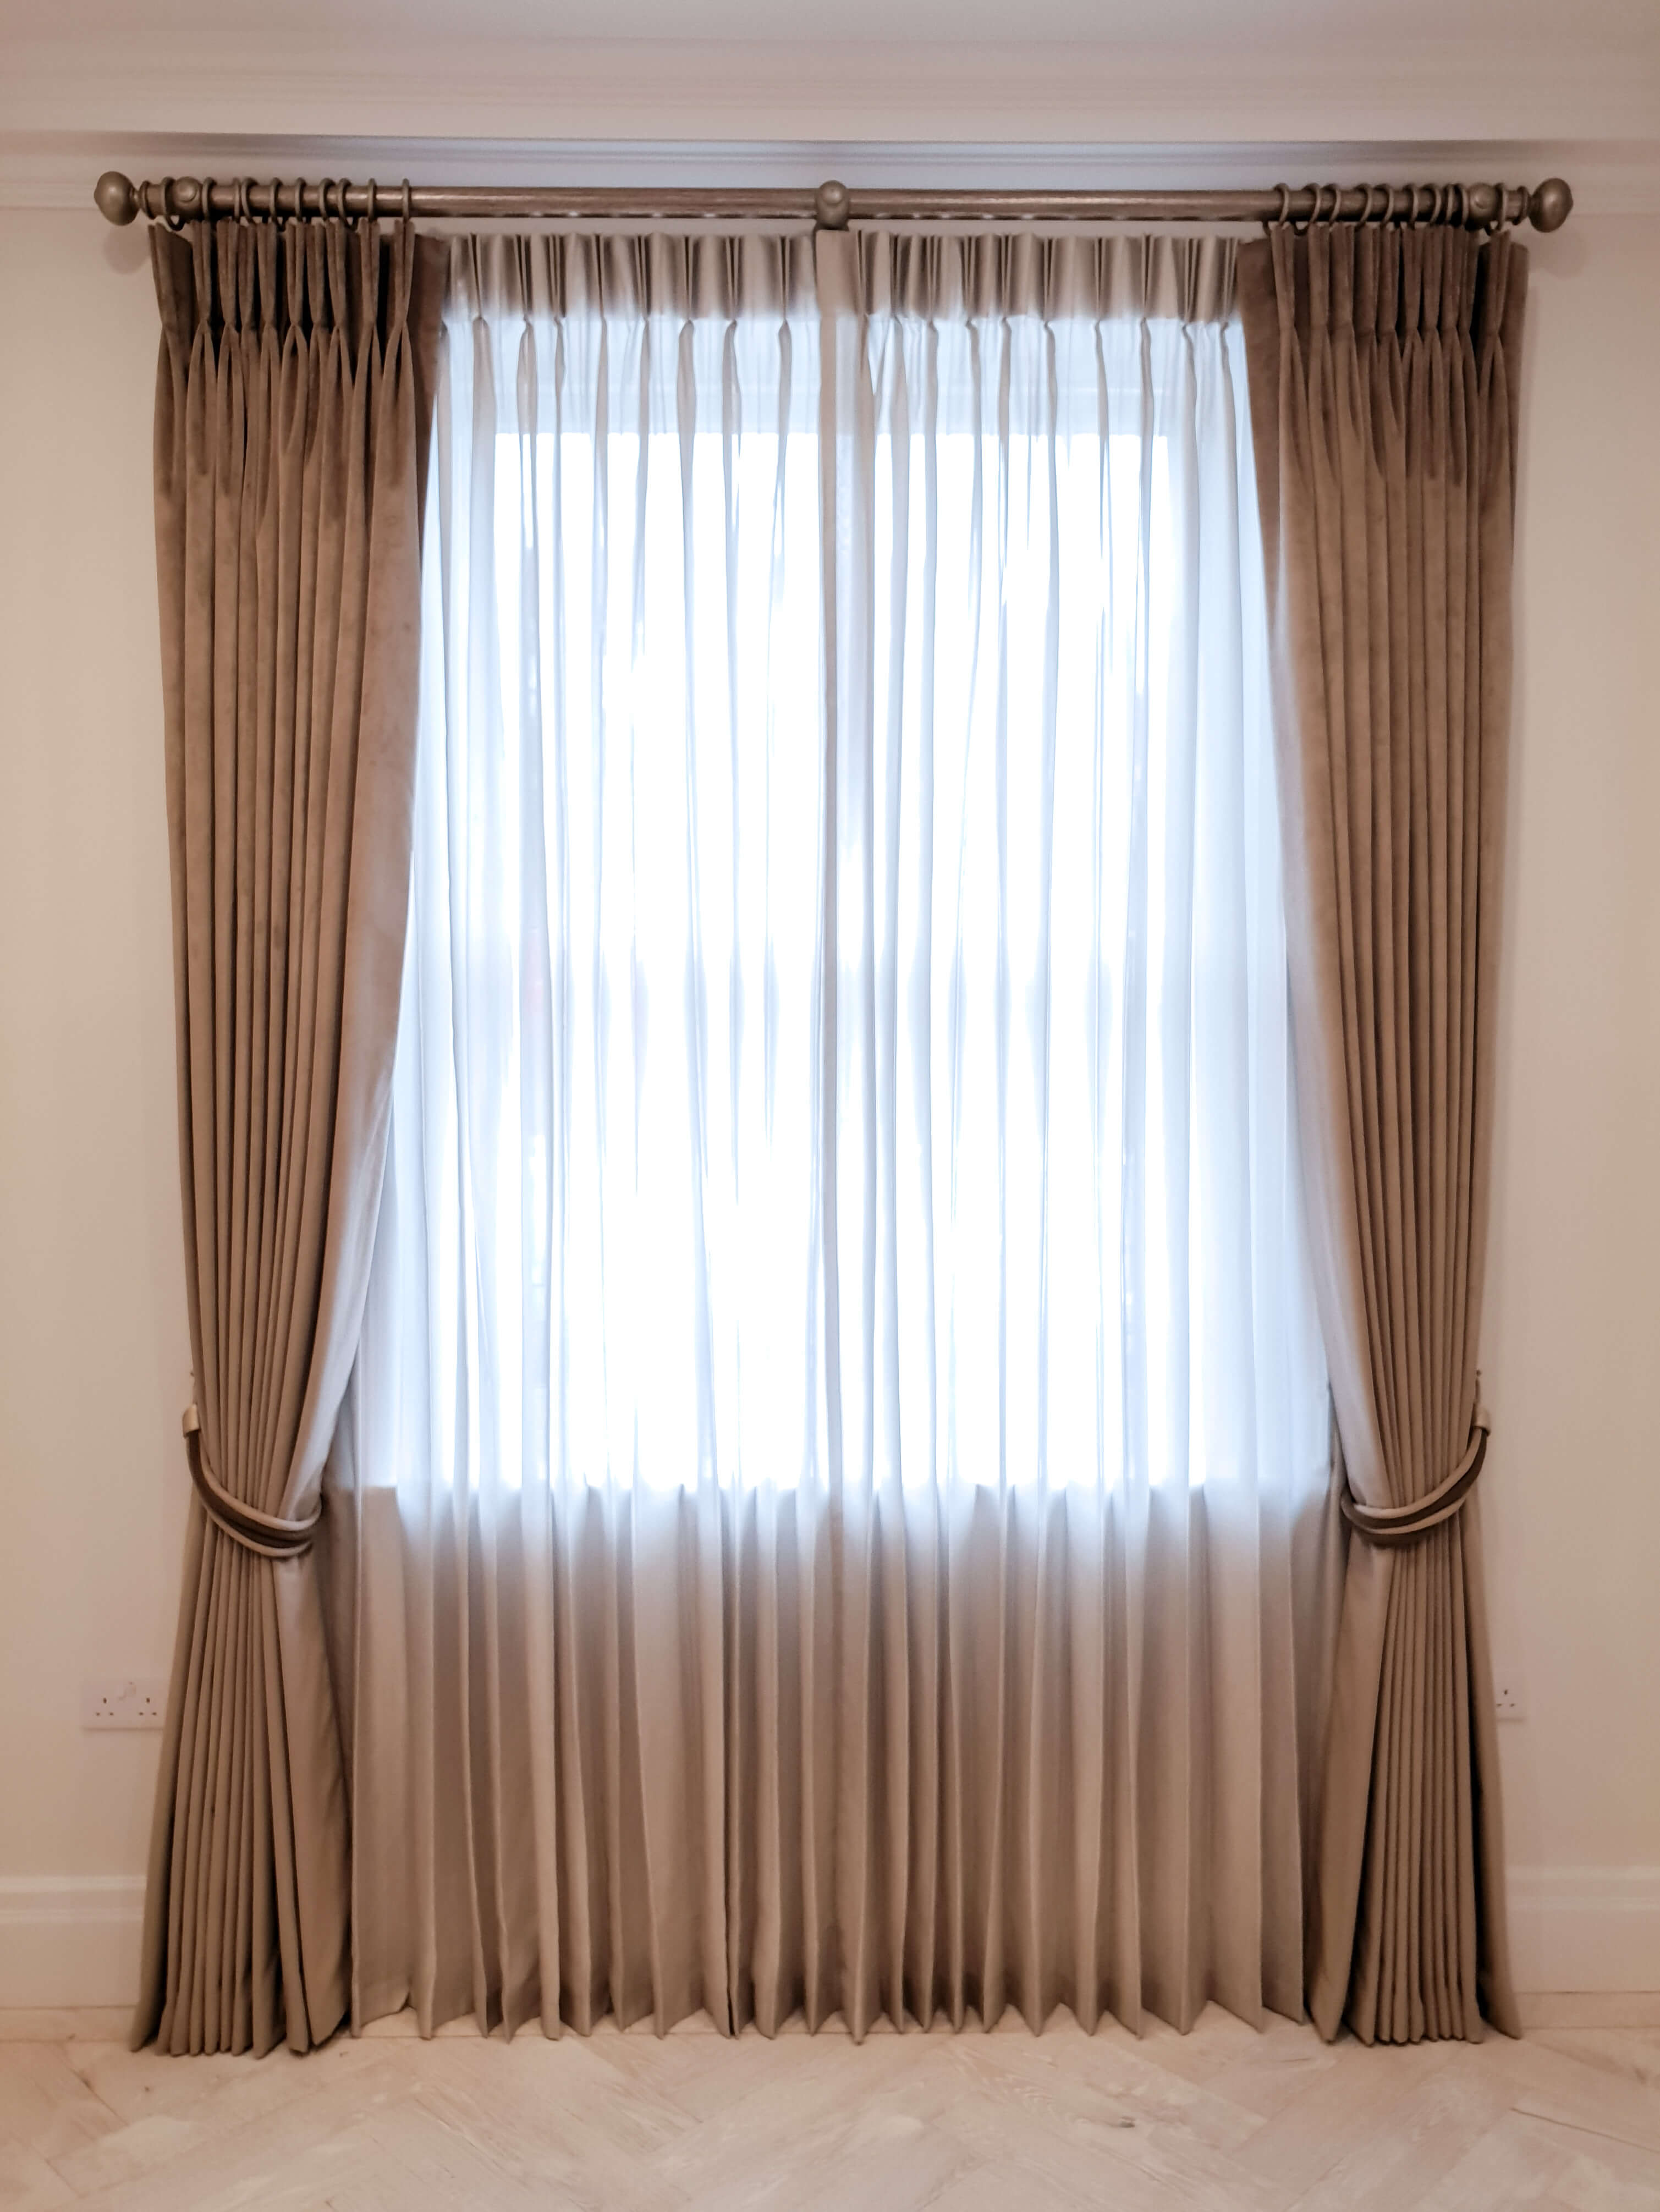 Curtains on a wooden pole with sheers